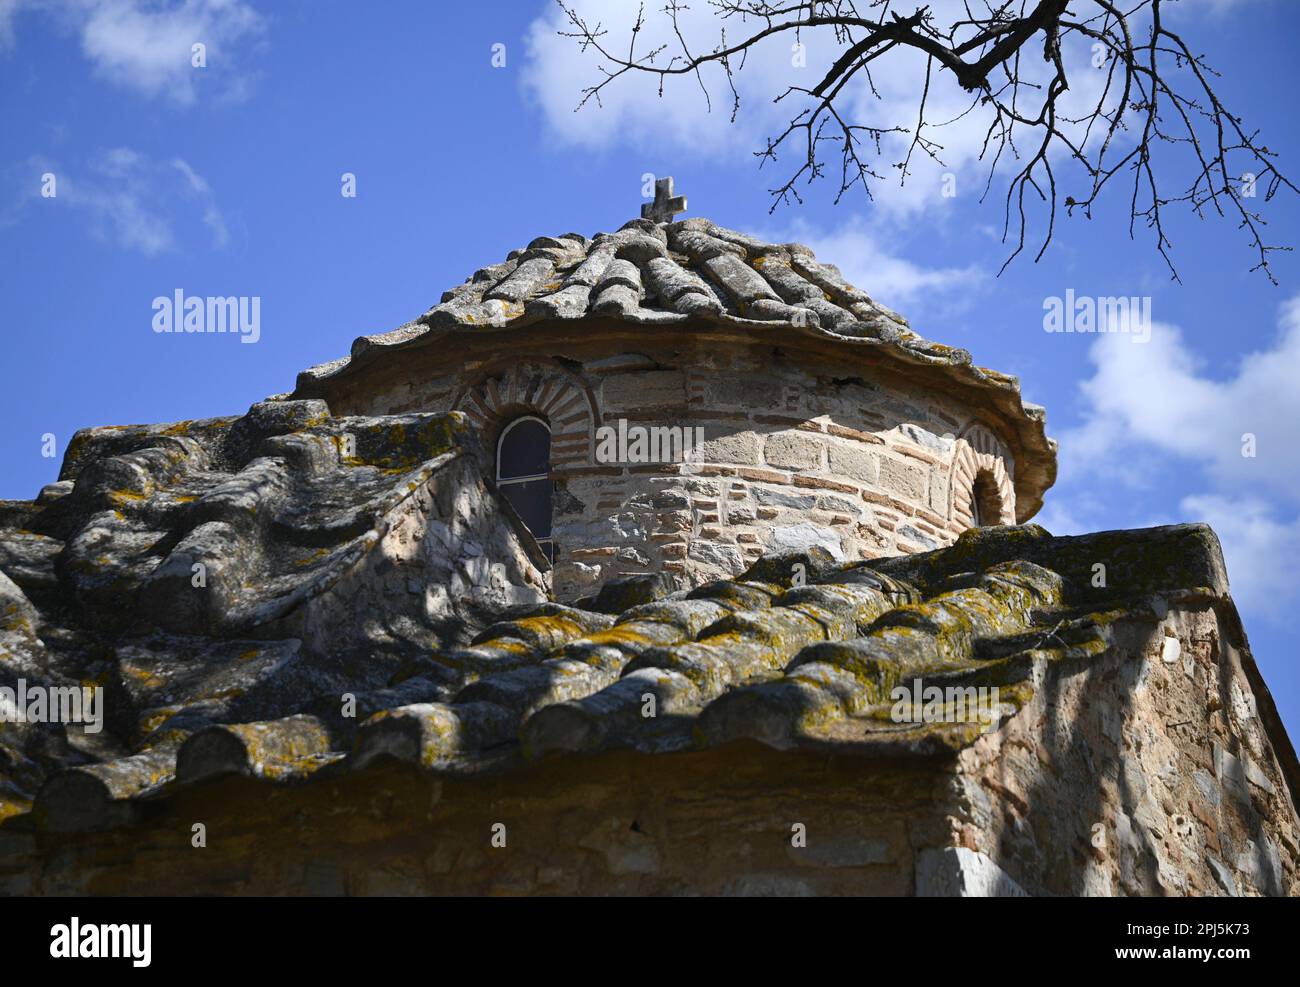 Landscape with scenic dome view of Aghios Petros a 12th century rectangular cruciform Byzantine church in Kalyvia Thorikou, Attica Greece. Stock Photo